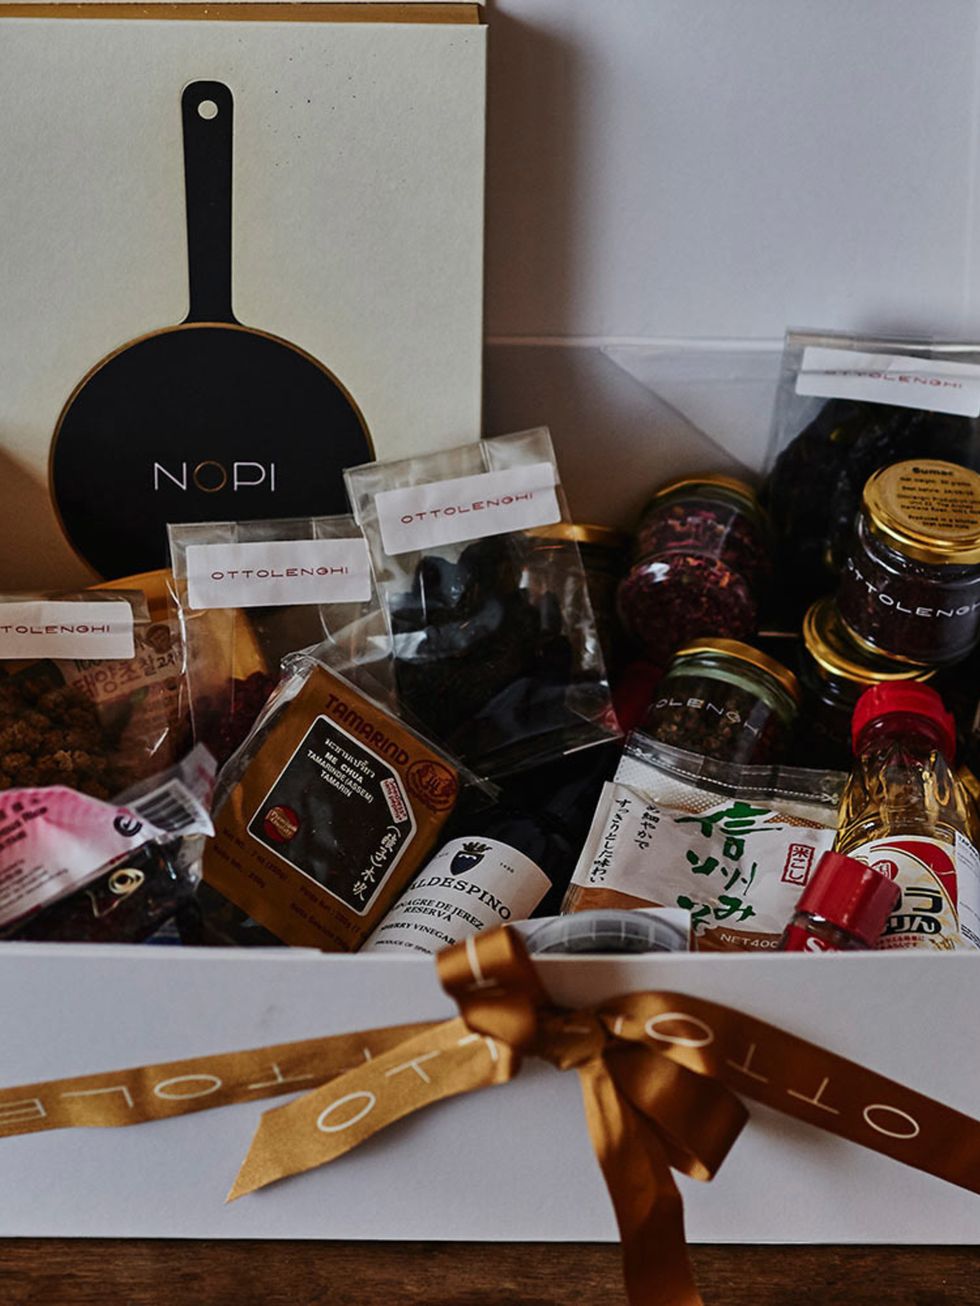 <p><strong>The Adventurous Chef  Nopi, Hamper + Book £100</strong></p>

<p>Weve all read the books and fallen in love with Yottam Ottolenghis recipes. This hamper is overflowing with the exotic ingredients like dried rose petals and Tamarind pulp to Ja